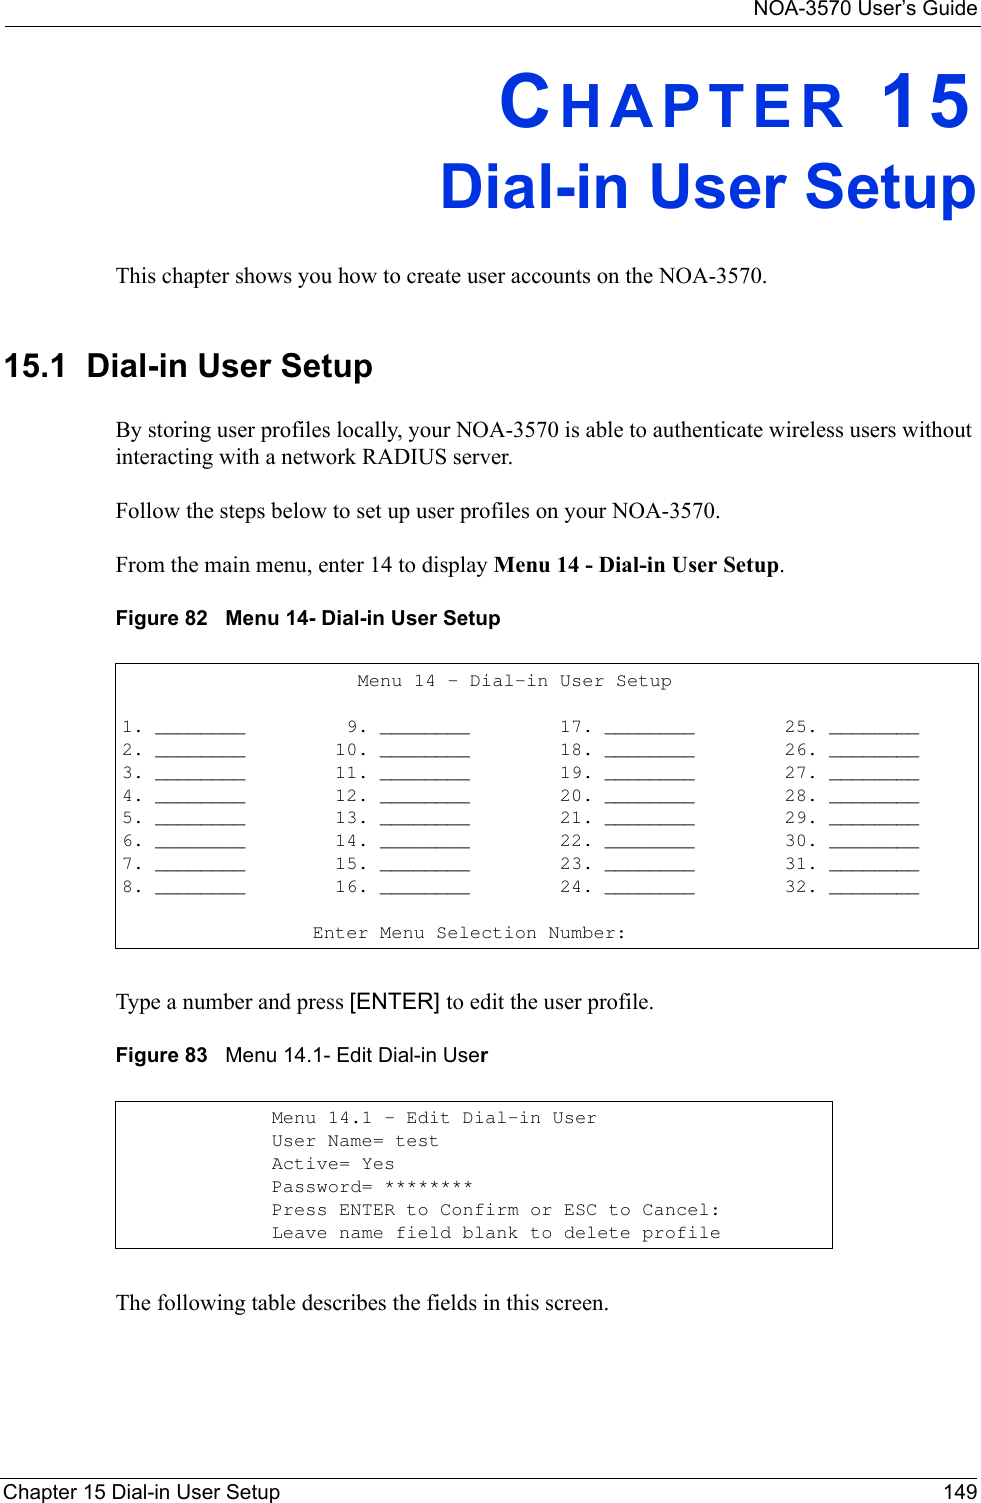 NOA-3570 User’s GuideChapter 15 Dial-in User Setup 149CHAPTER 15Dial-in User SetupThis chapter shows you how to create user accounts on the NOA-3570. 15.1  Dial-in User SetupBy storing user profiles locally, your NOA-3570 is able to authenticate wireless users without interacting with a network RADIUS server. Follow the steps below to set up user profiles on your NOA-3570.From the main menu, enter 14 to display Menu 14 - Dial-in User Setup.Figure 82   Menu 14- Dial-in User SetupType a number and press [ENTER] to edit the user profile. Figure 83   Menu 14.1- Edit Dial-in UserThe following table describes the fields in this screen.                      Menu 14 - Dial-in User Setup1. ________         9. ________        17. ________        25. ________2. ________        10. ________        18. ________        26. ________3. ________        11. ________        19. ________        27. ________4. ________        12. ________        20. ________        28. ________5. ________        13. ________        21. ________        29. ________6. ________        14. ________        22. ________        30. ________7. ________        15. ________        23. ________        31. ________8. ________        16. ________        24. ________        32. ________                                           Enter Menu Selection Number:Menu 14.1 - Edit Dial-in UserUser Name= testActive= YesPassword= ********Press ENTER to Confirm or ESC to Cancel:Leave name field blank to delete profile 